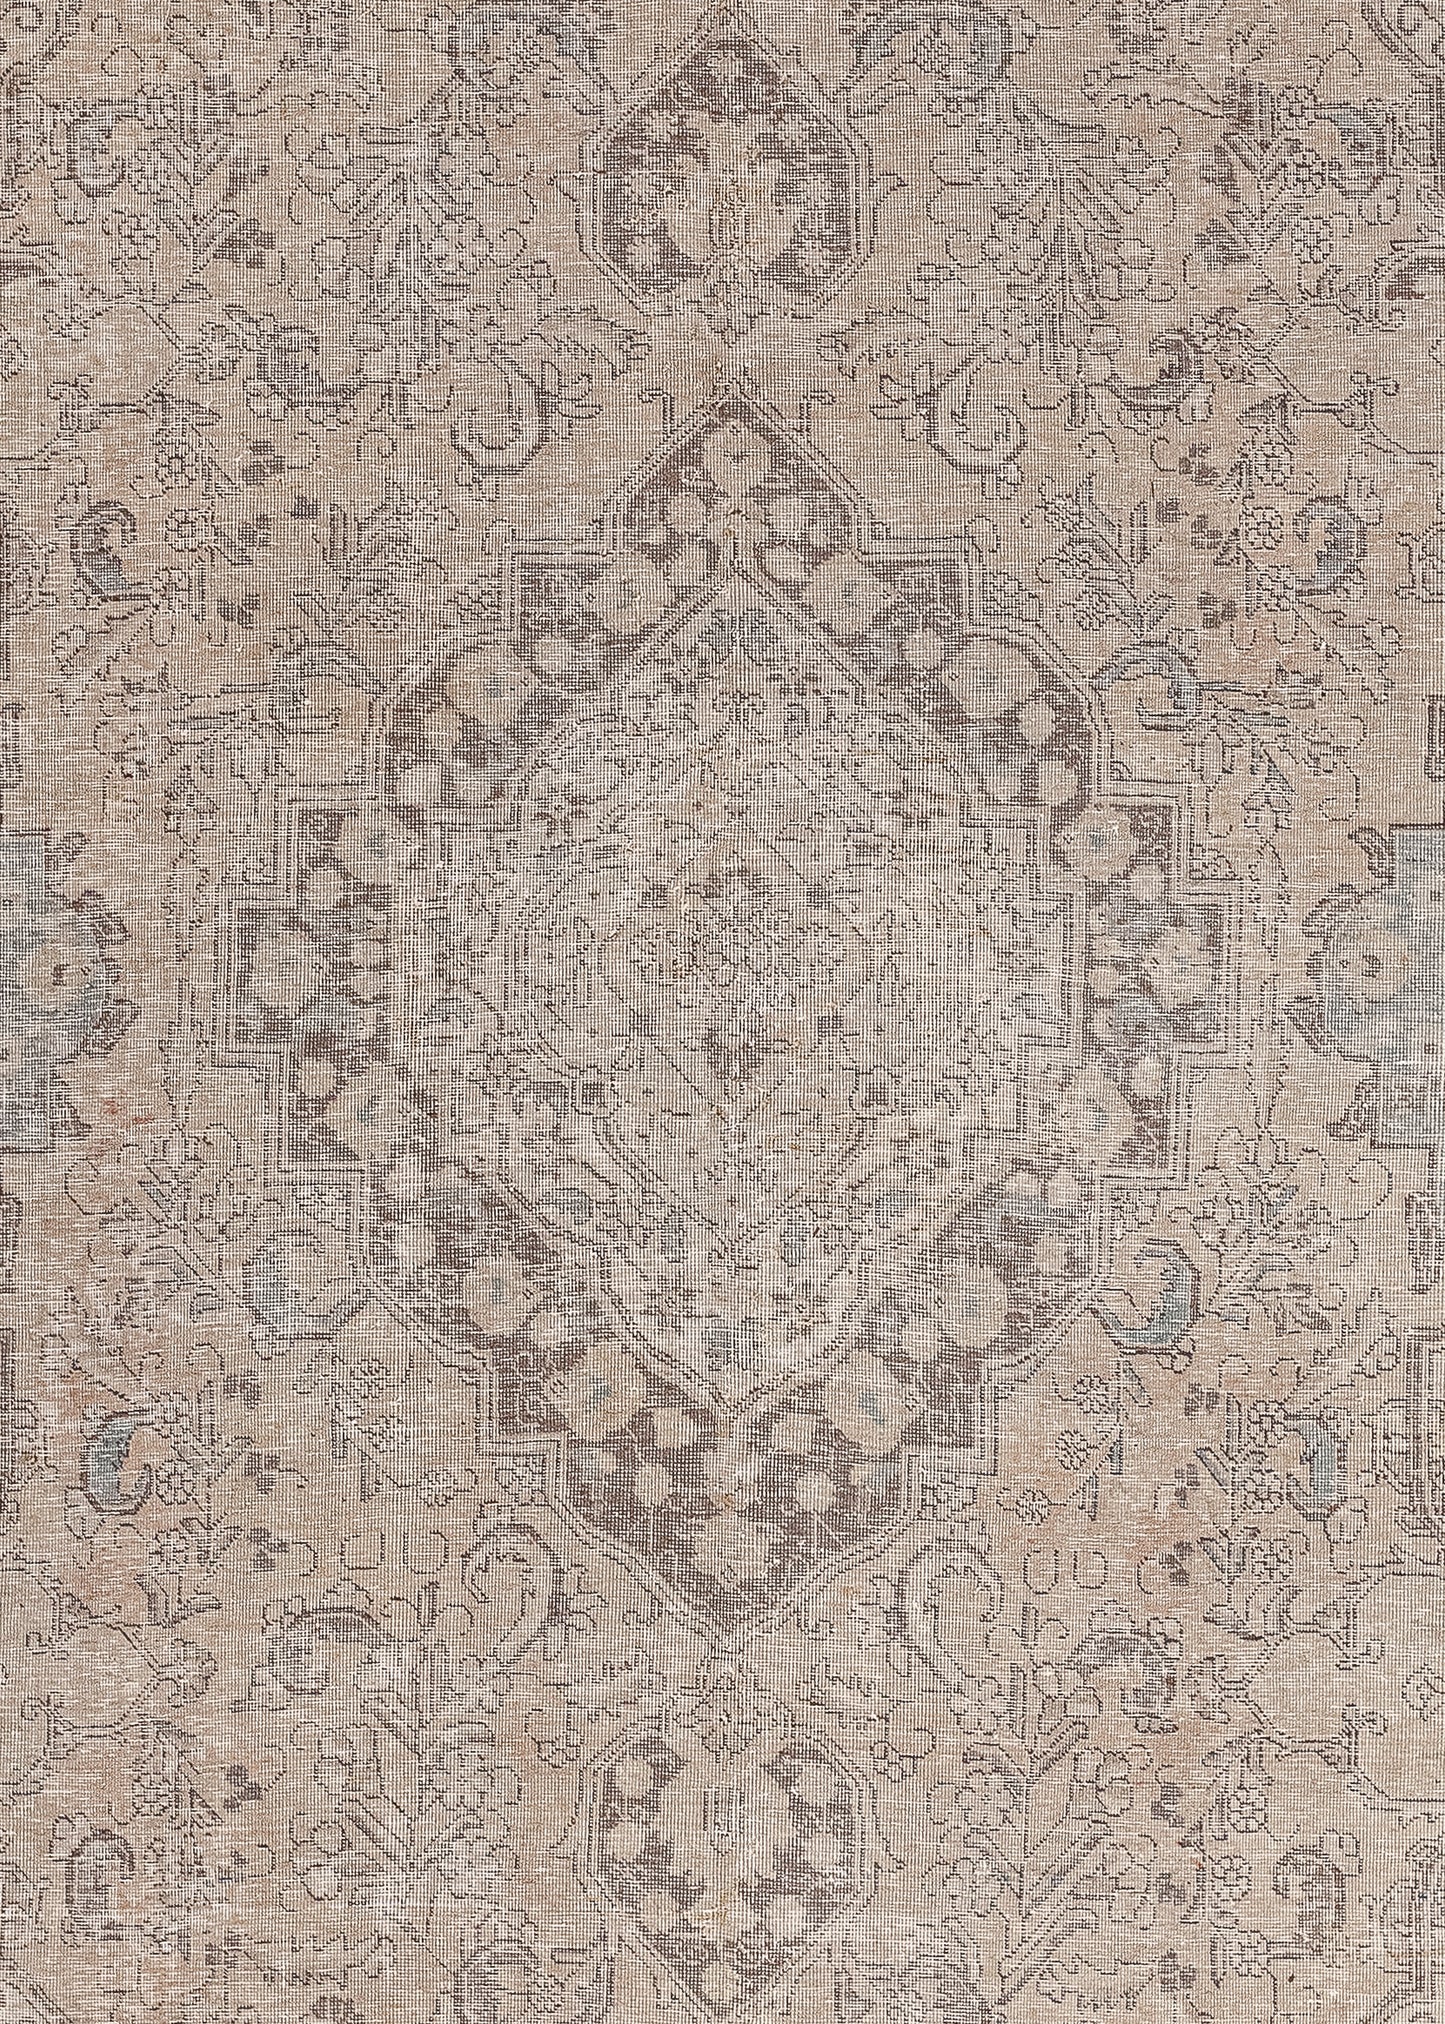 The rug's close-up features a sizable rhombus that has nested ones filled with floral motifs.